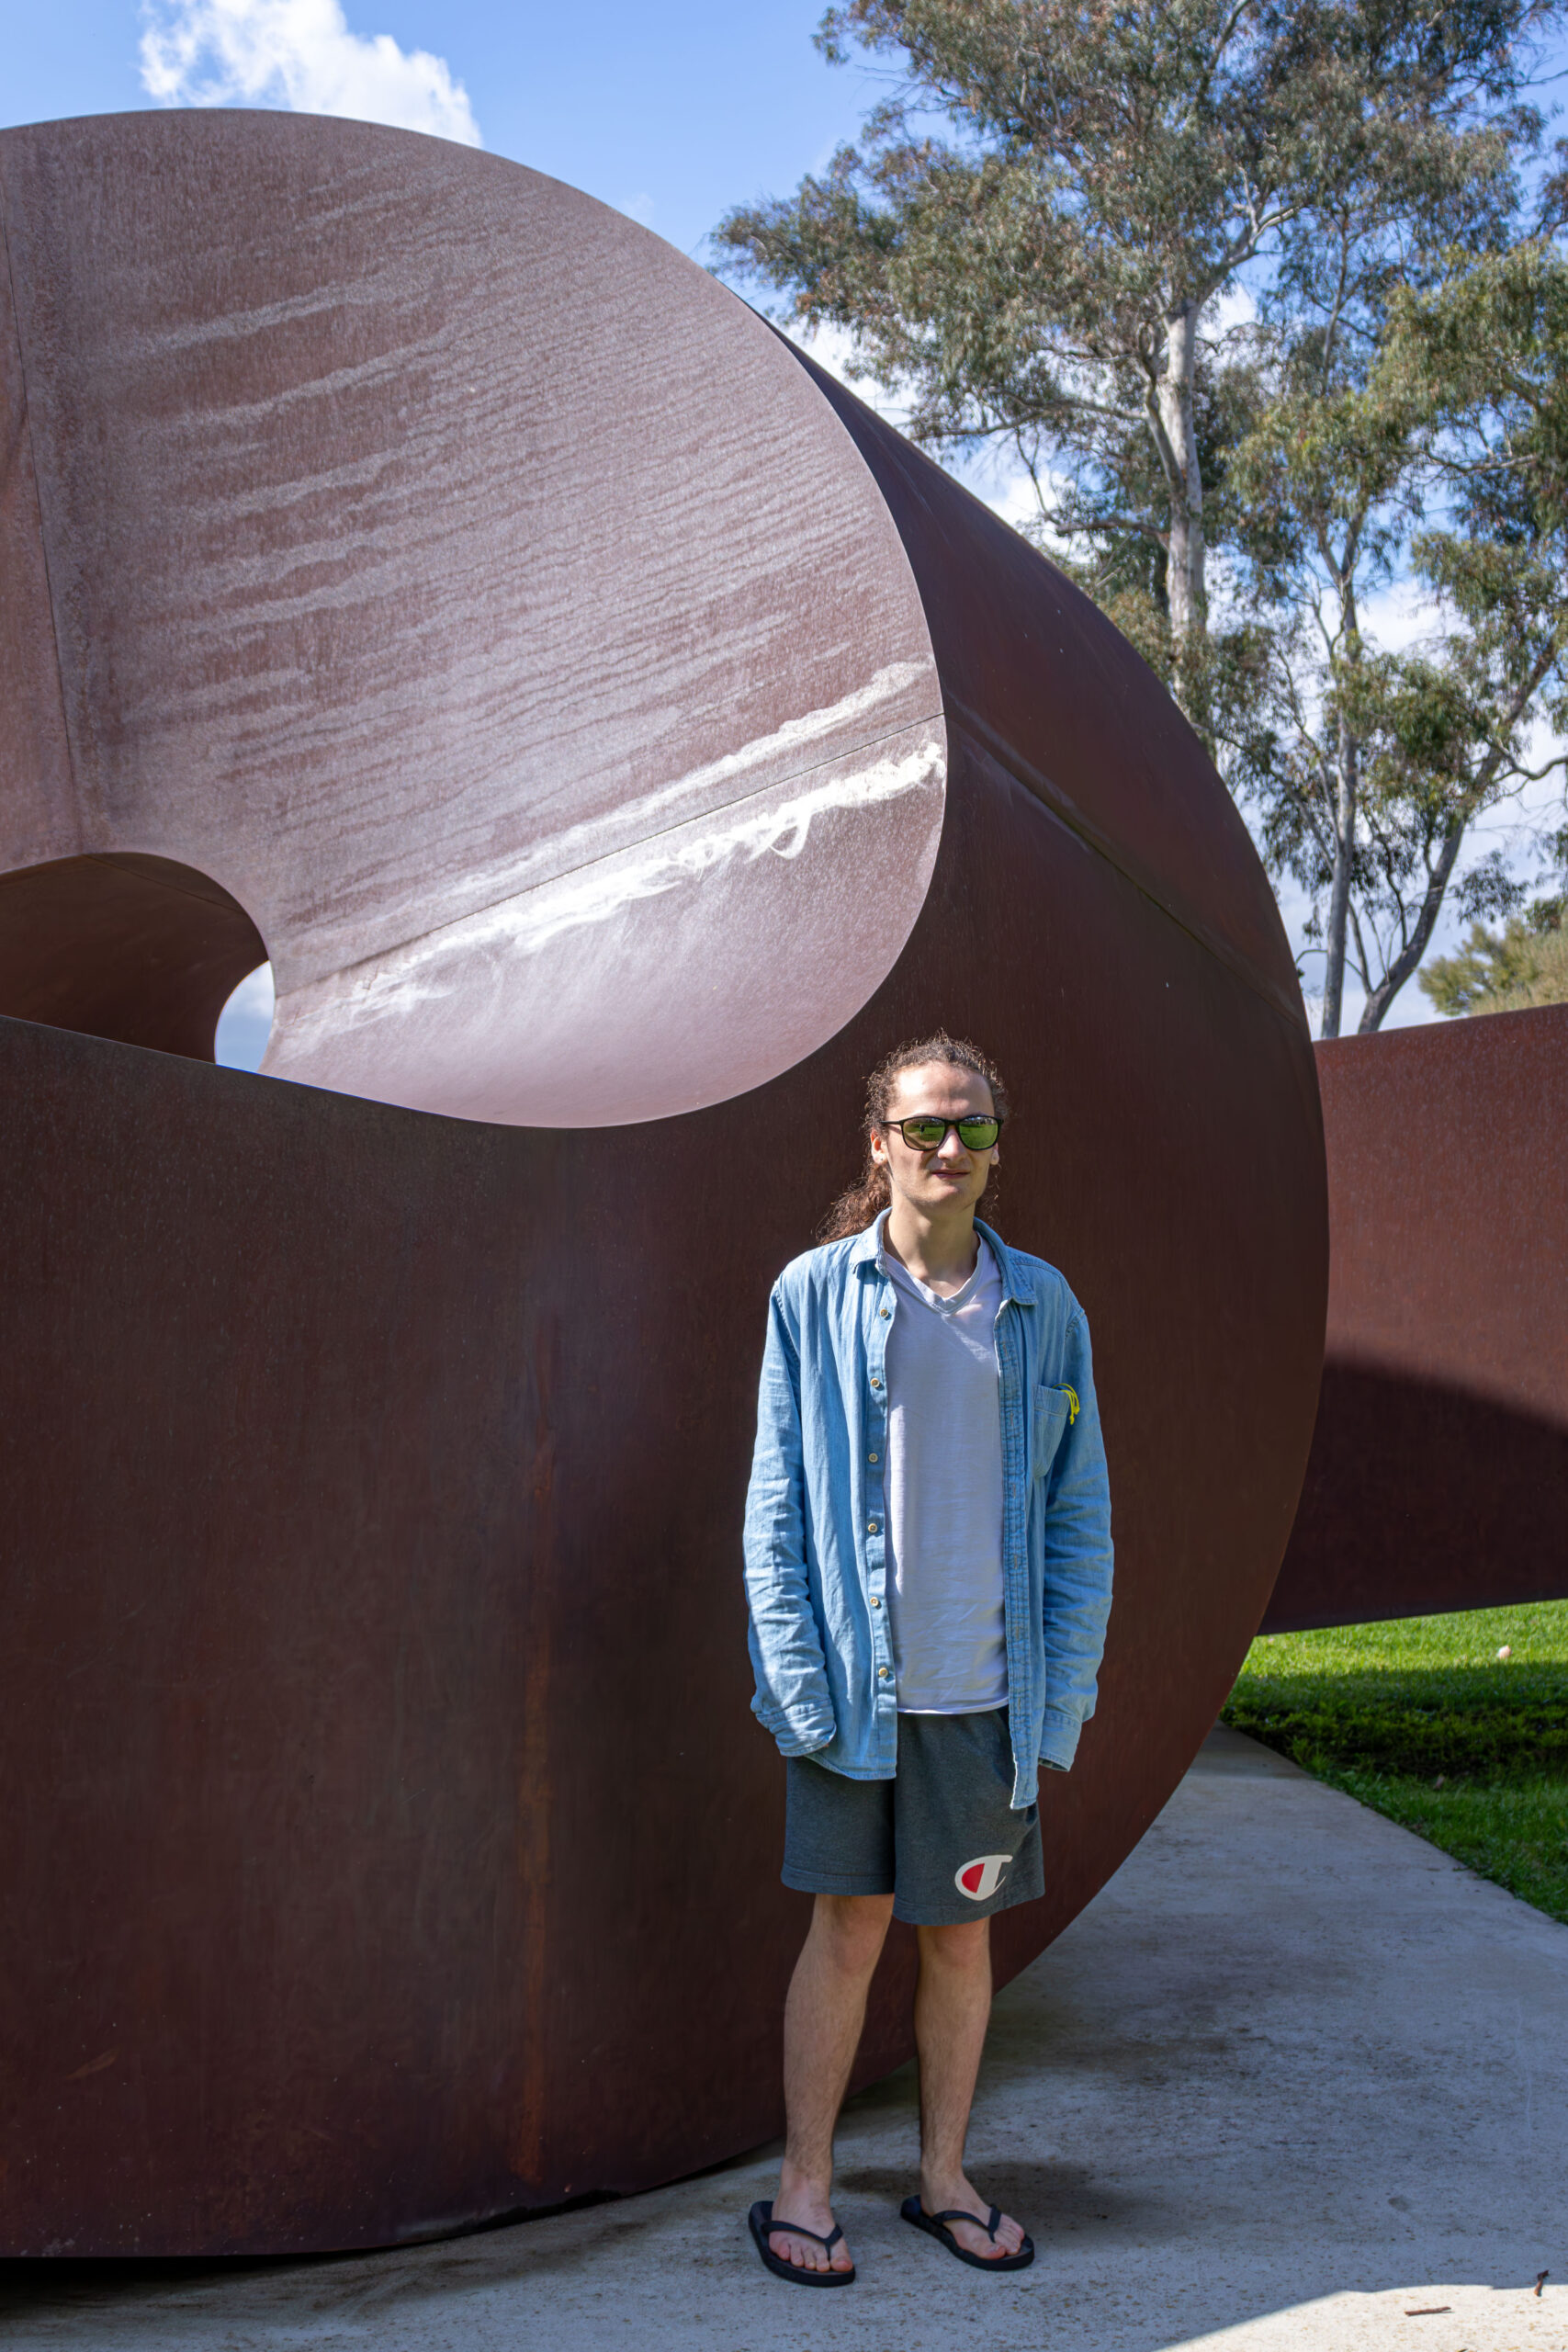 A young man in a blue shirt and sunglasses standing in front of a large round metal scultpture. He has long hair tied back